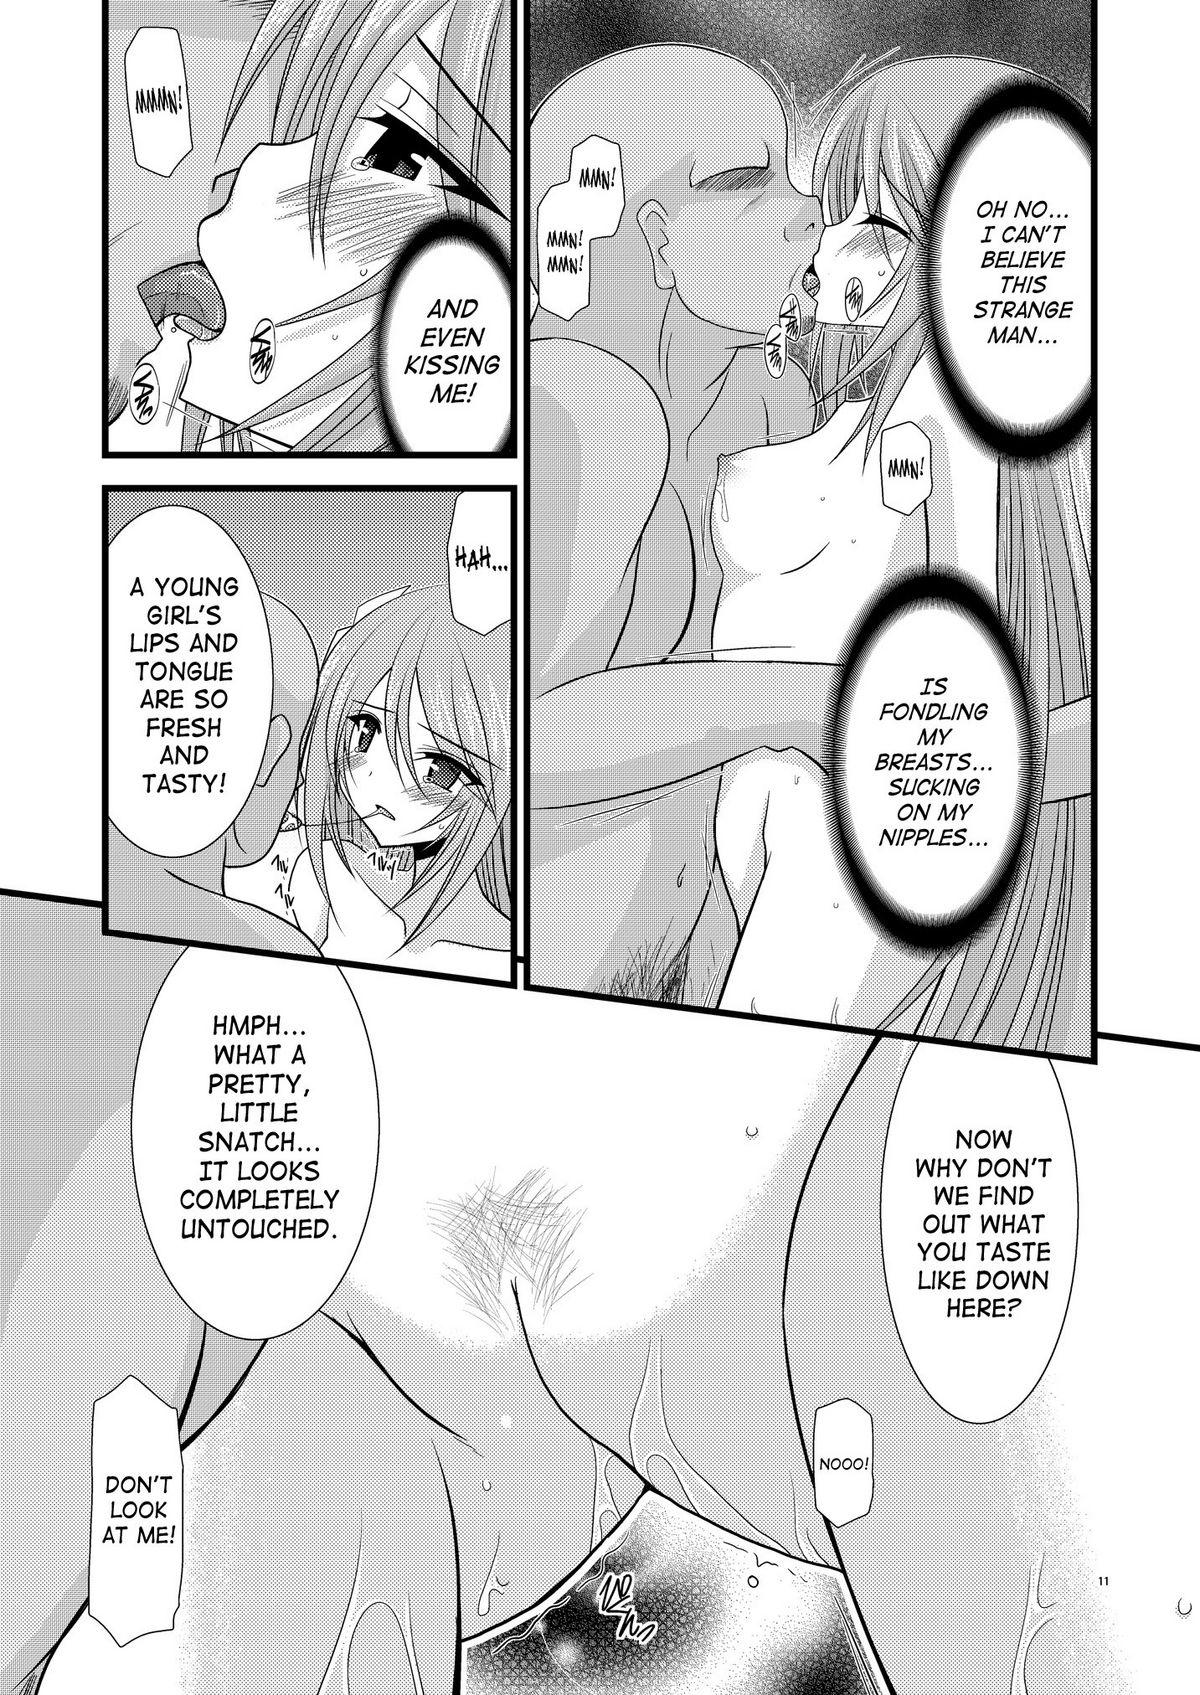 Work DREAM REALIZE - Tales of symphonia Passionate - Page 10